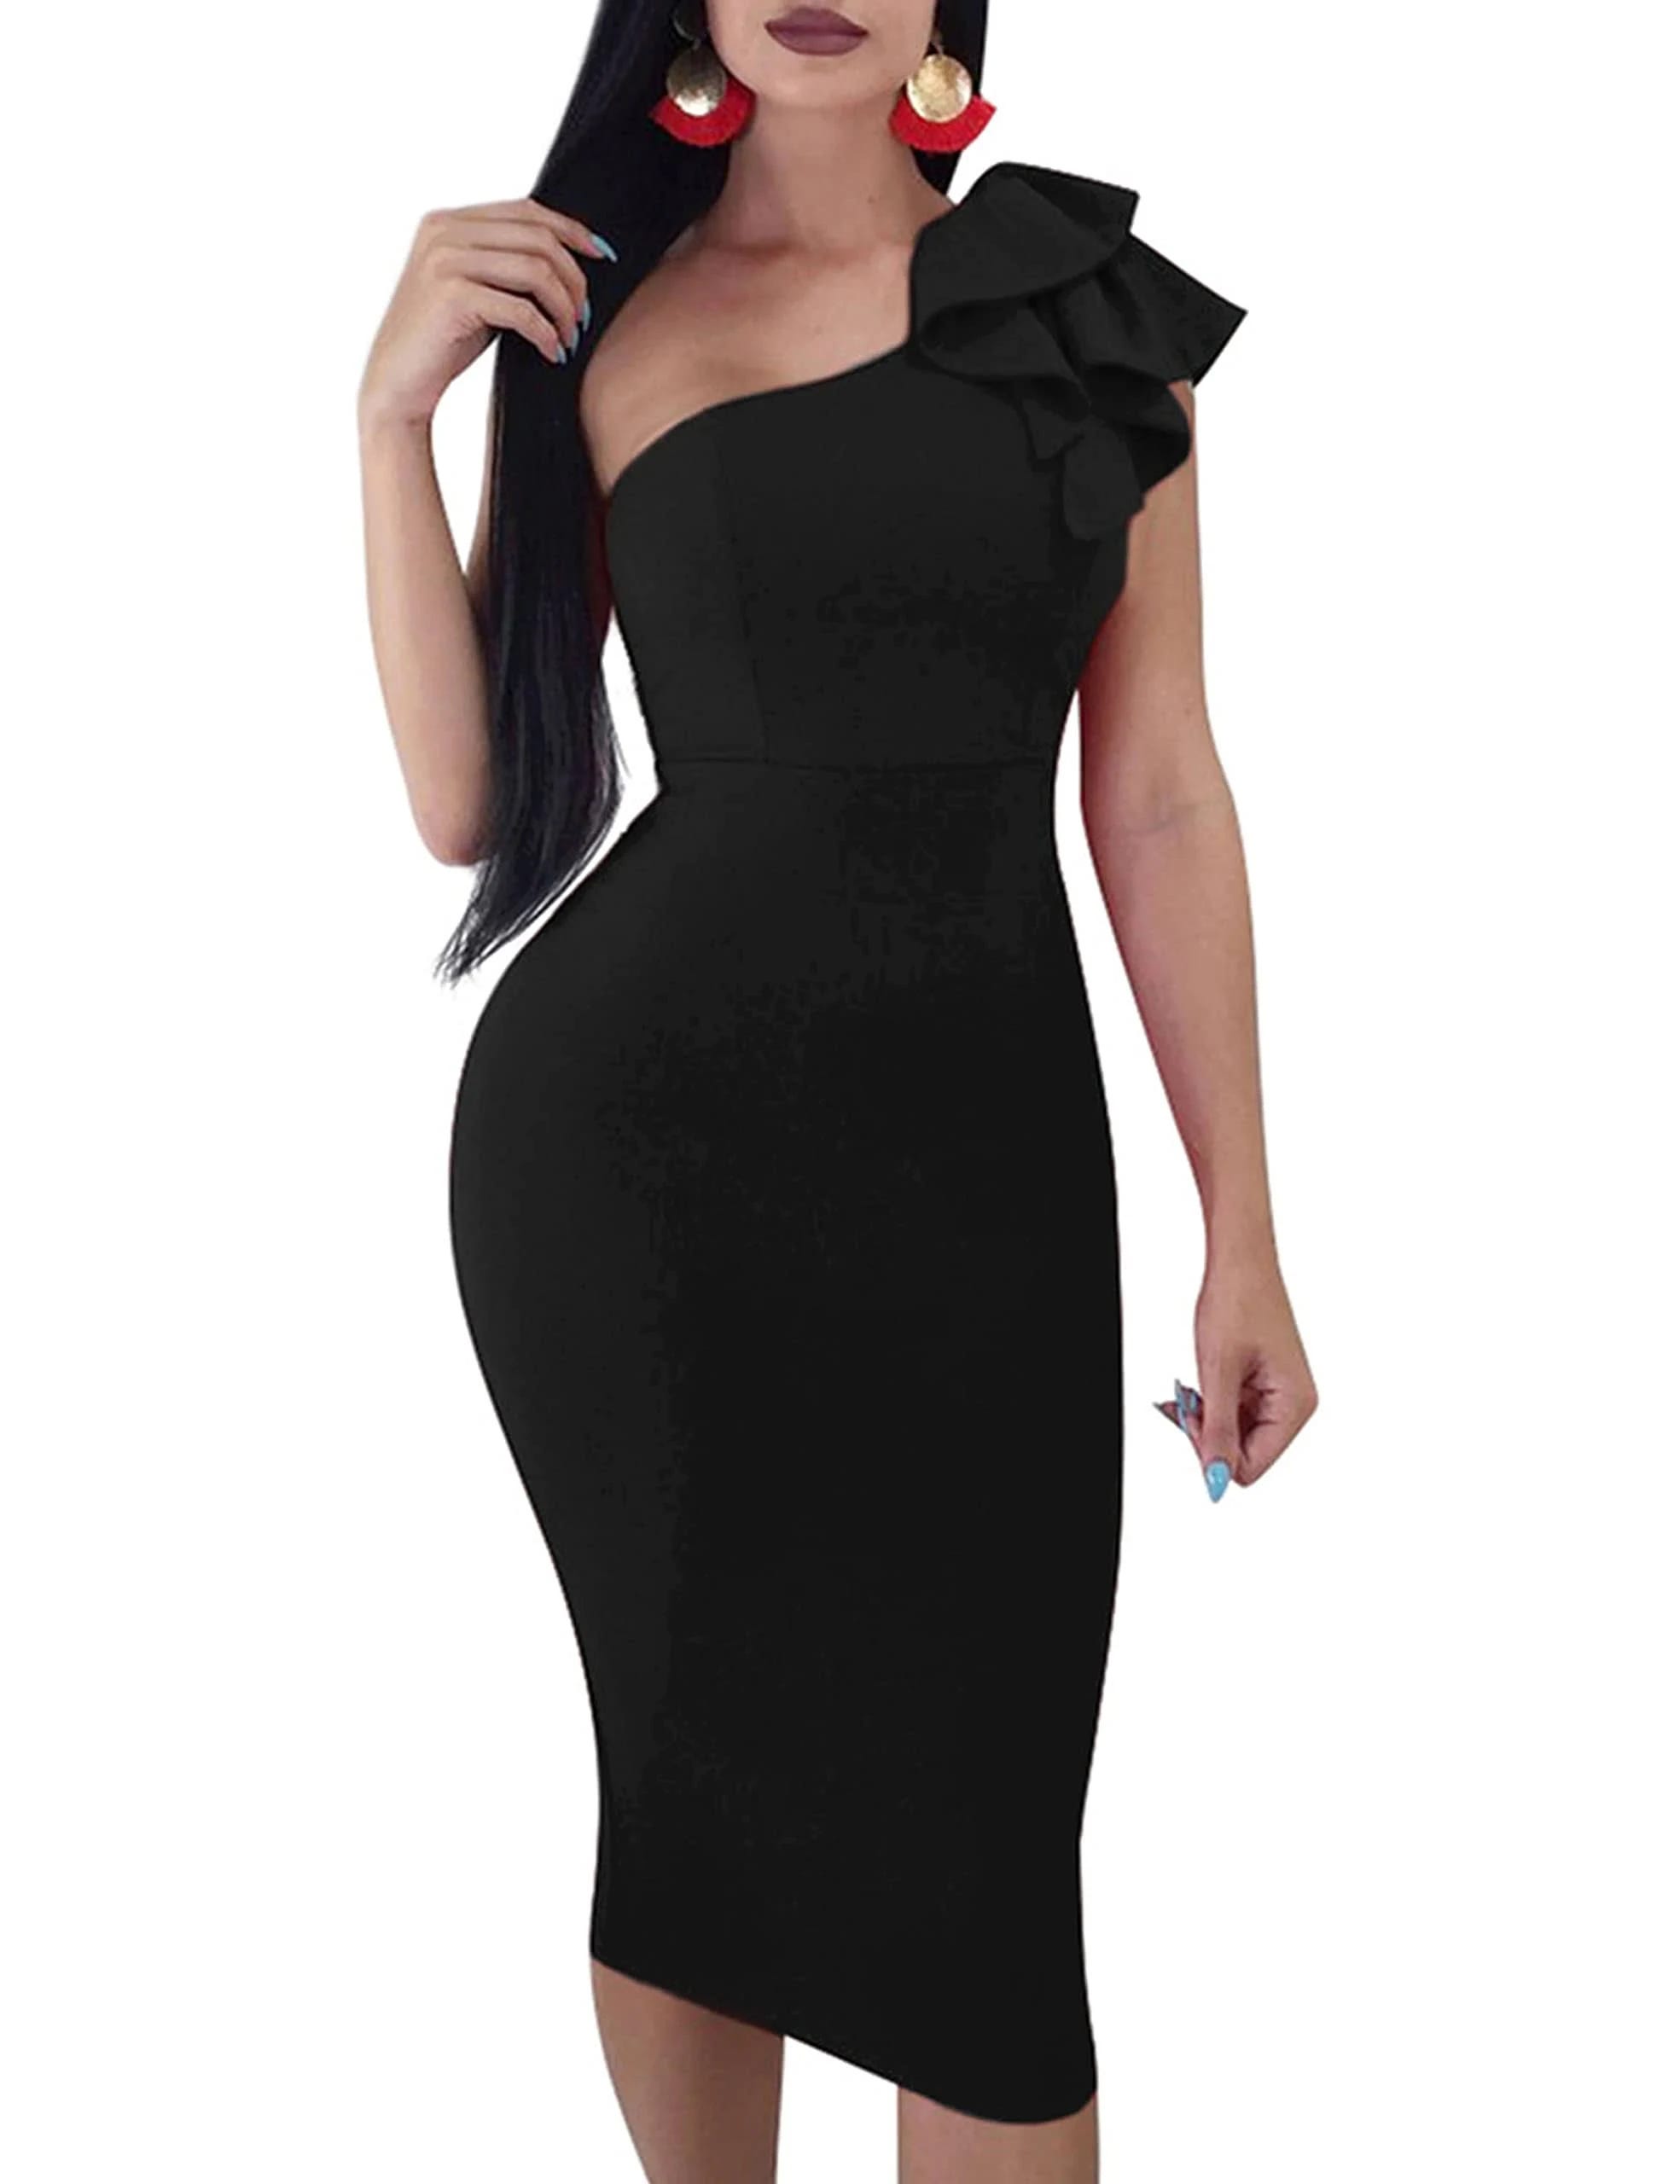 Sensual One-Shoulder Black Midi Dress for Cocktail Parties | Image